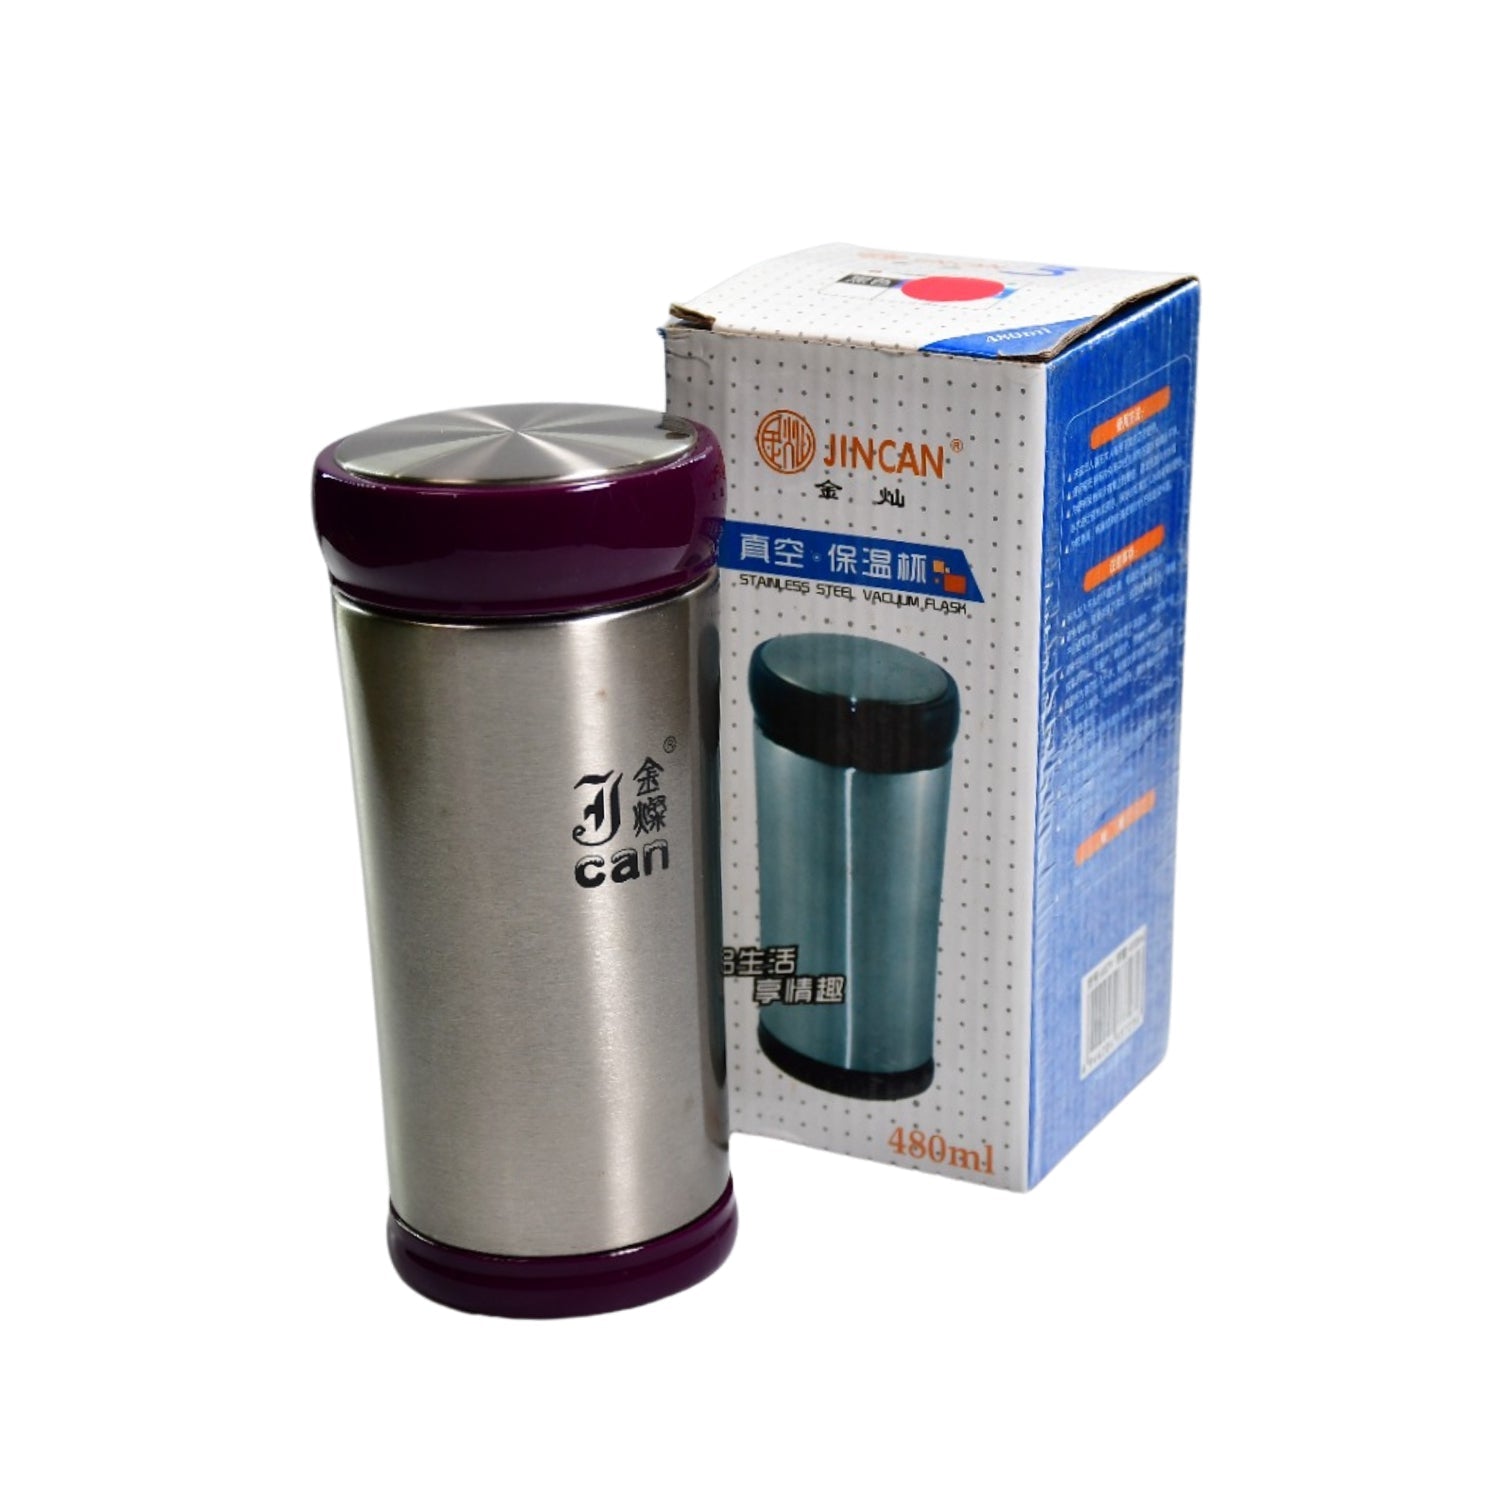 6457 480ML PLAIN PRINT STAINLESS STEEL WATER BOTTLE FOR OFFICE, HOME, GYM, OUTDOOR TRAVEL HOT AND COLD DRINKS. DeoDap